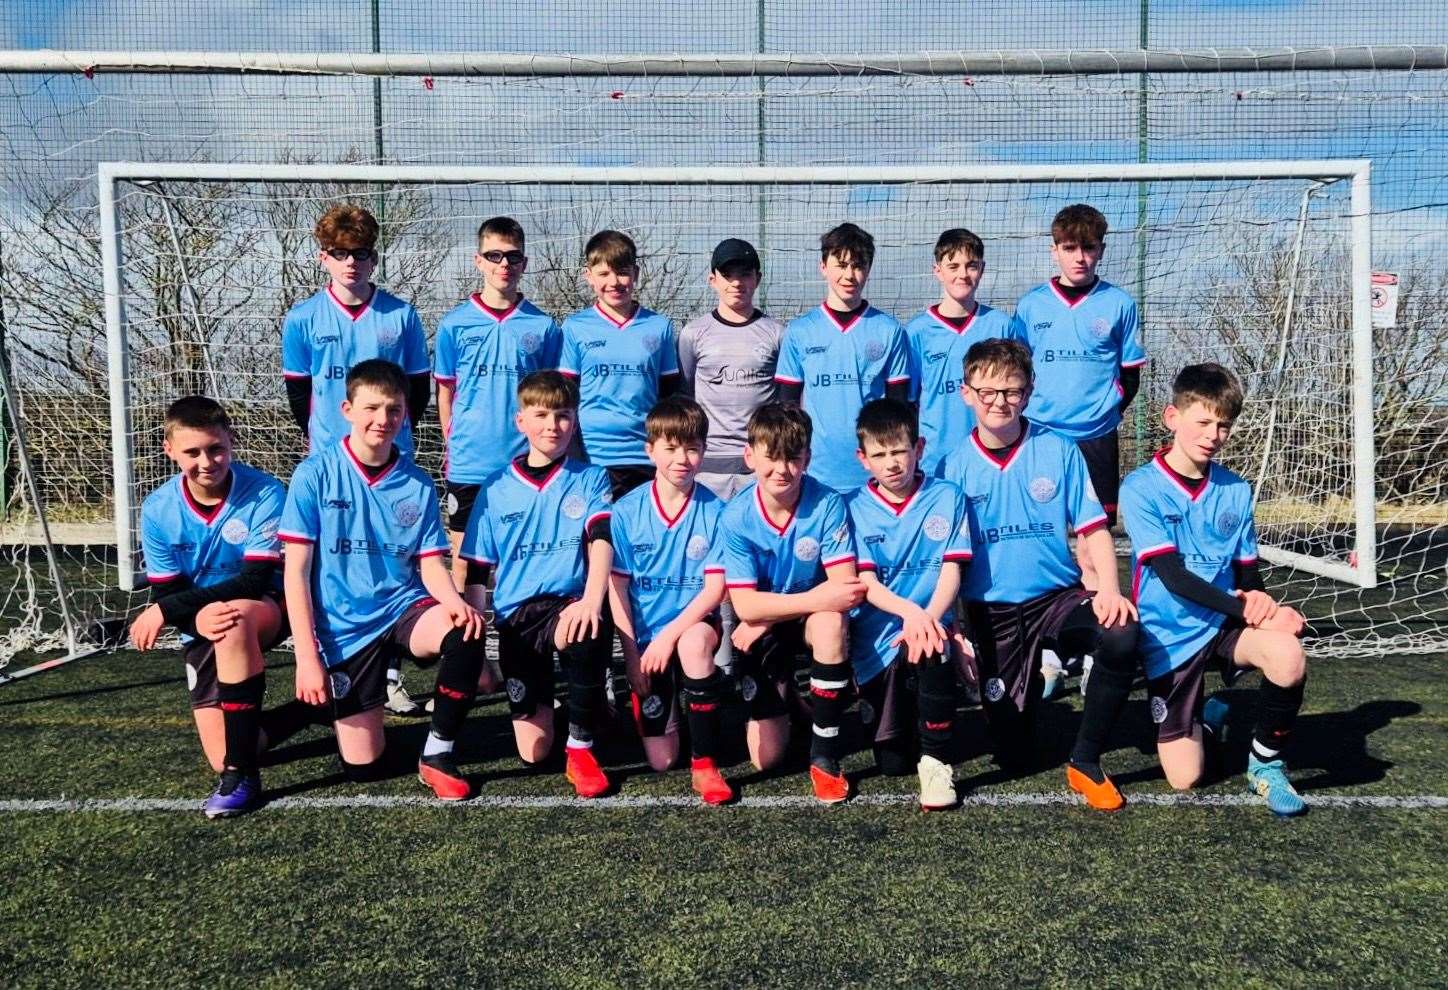 The Caithness United under-14s who played Balloan Fury at the Wick campus.